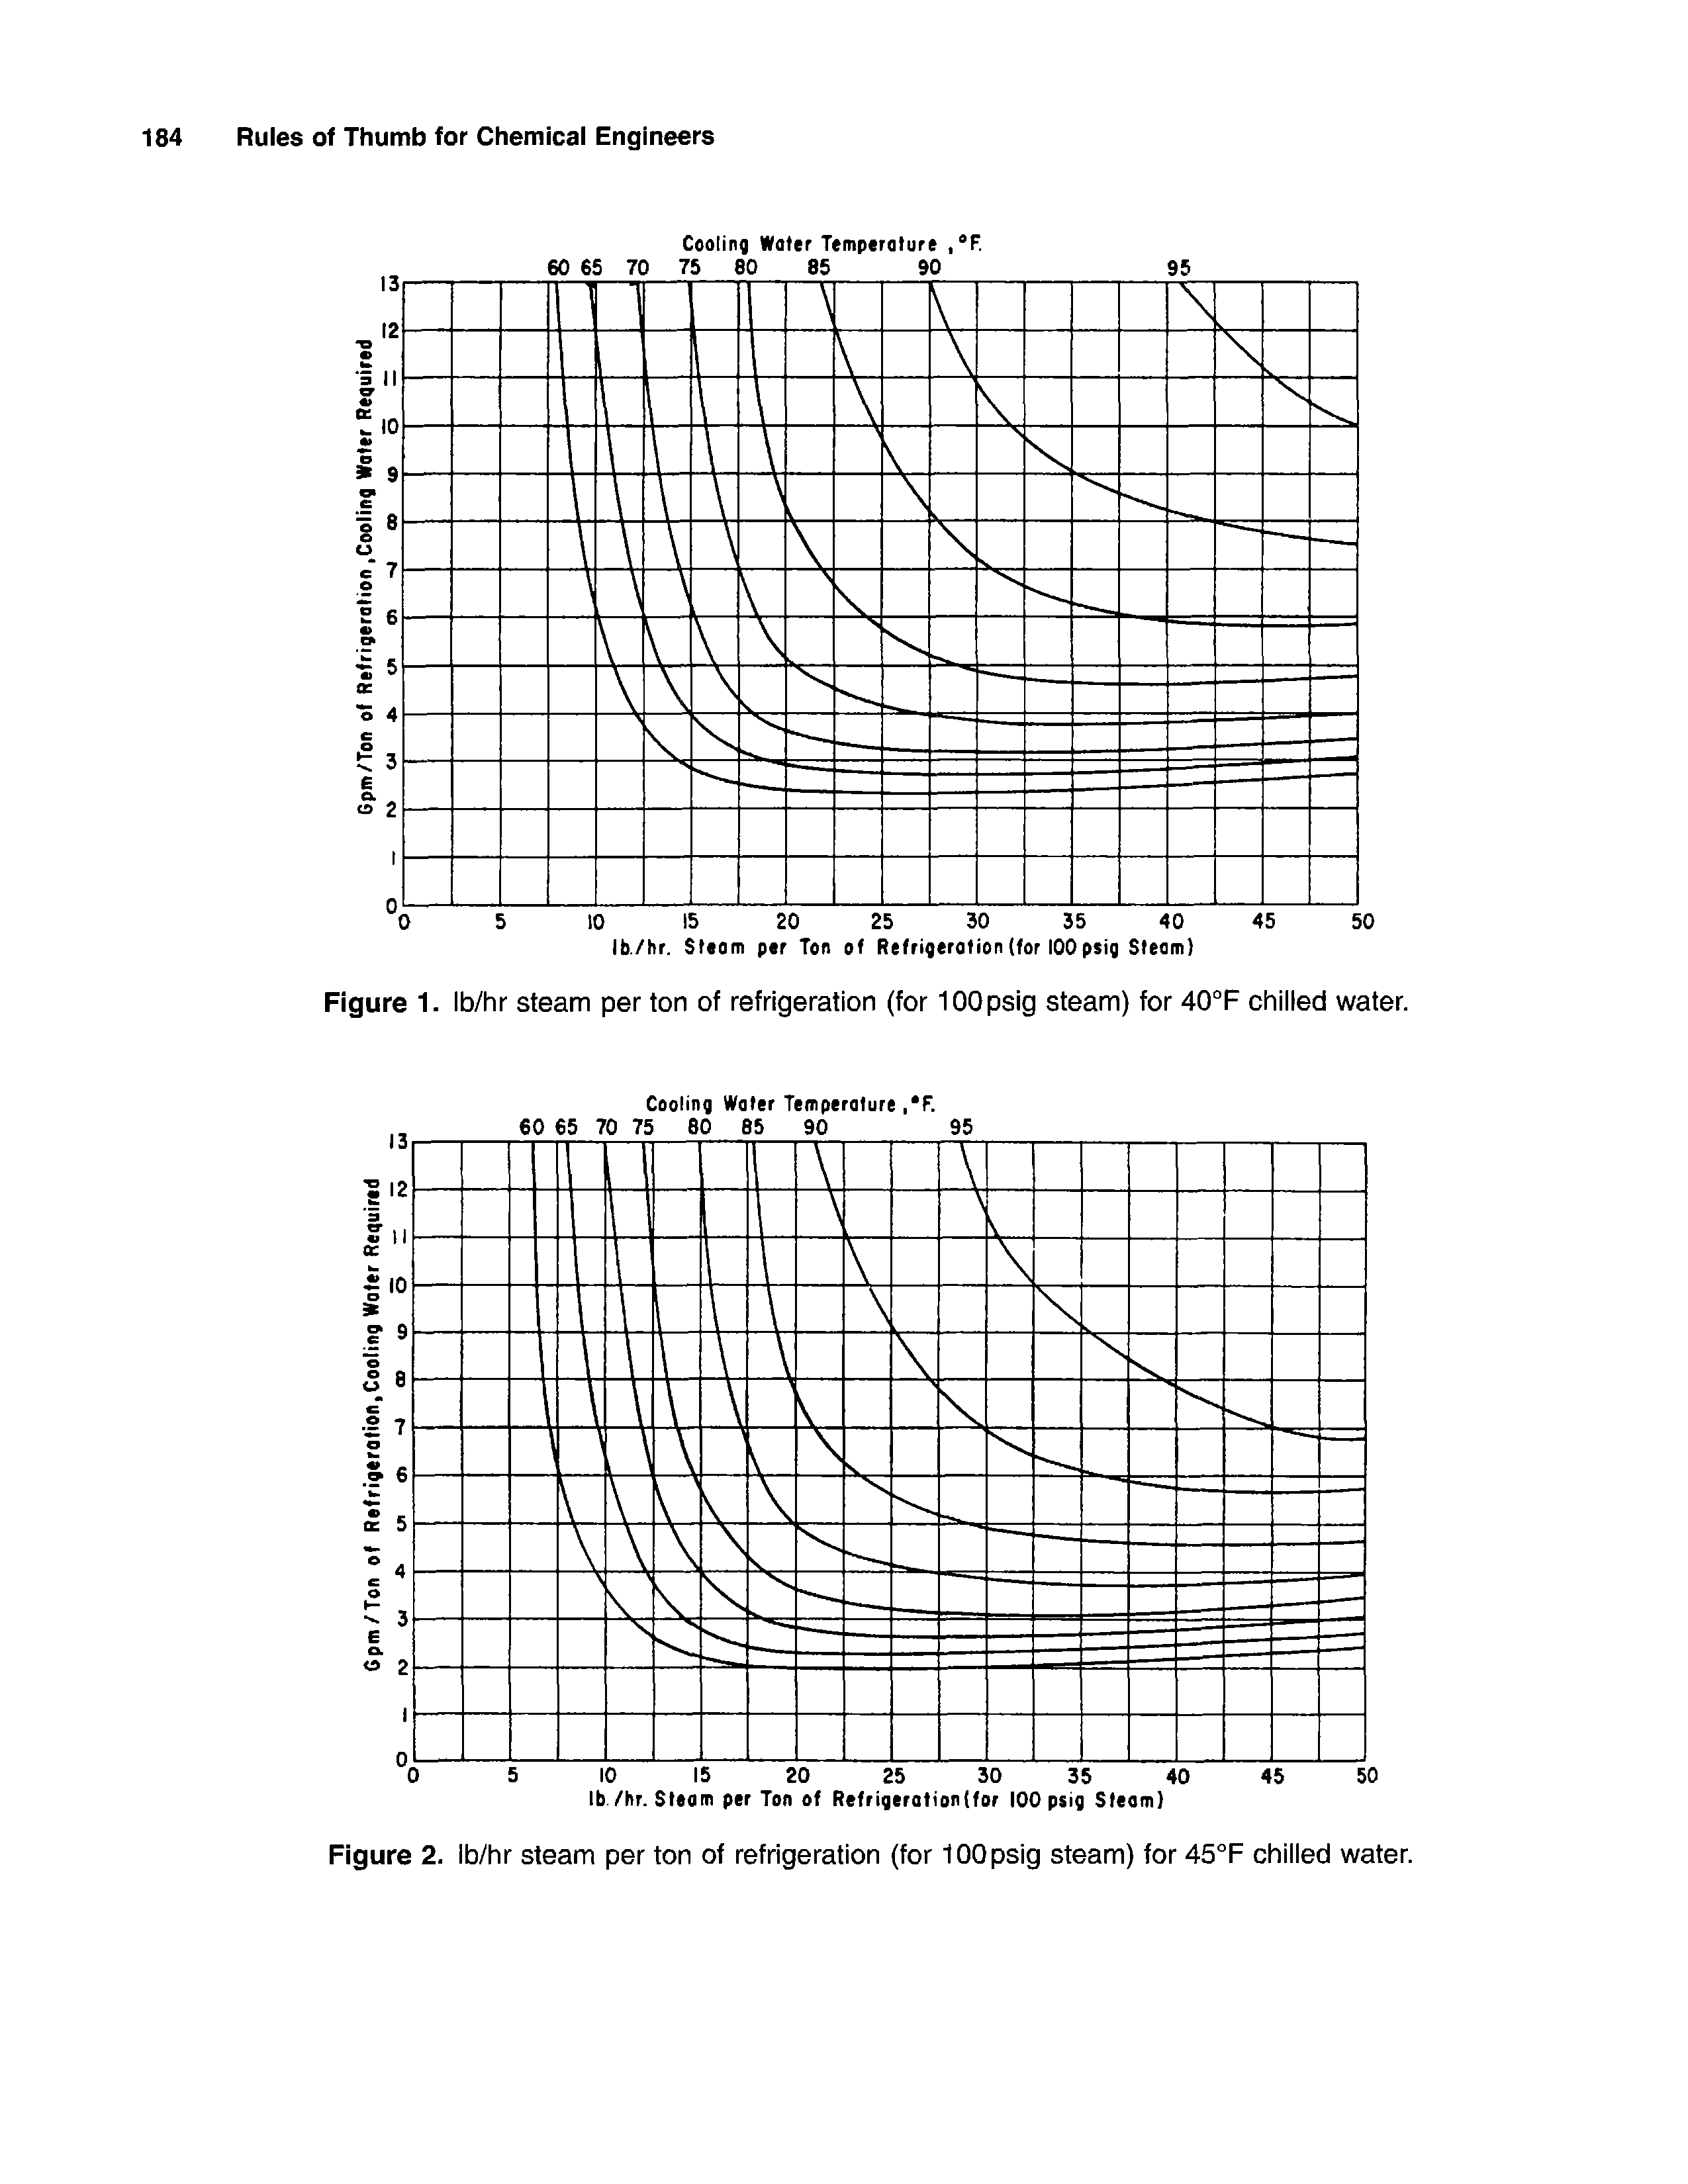 Figure 1. Ib/hr steam per ton of refrigeration (for lOOpsig steam) for 40°F chilled water.